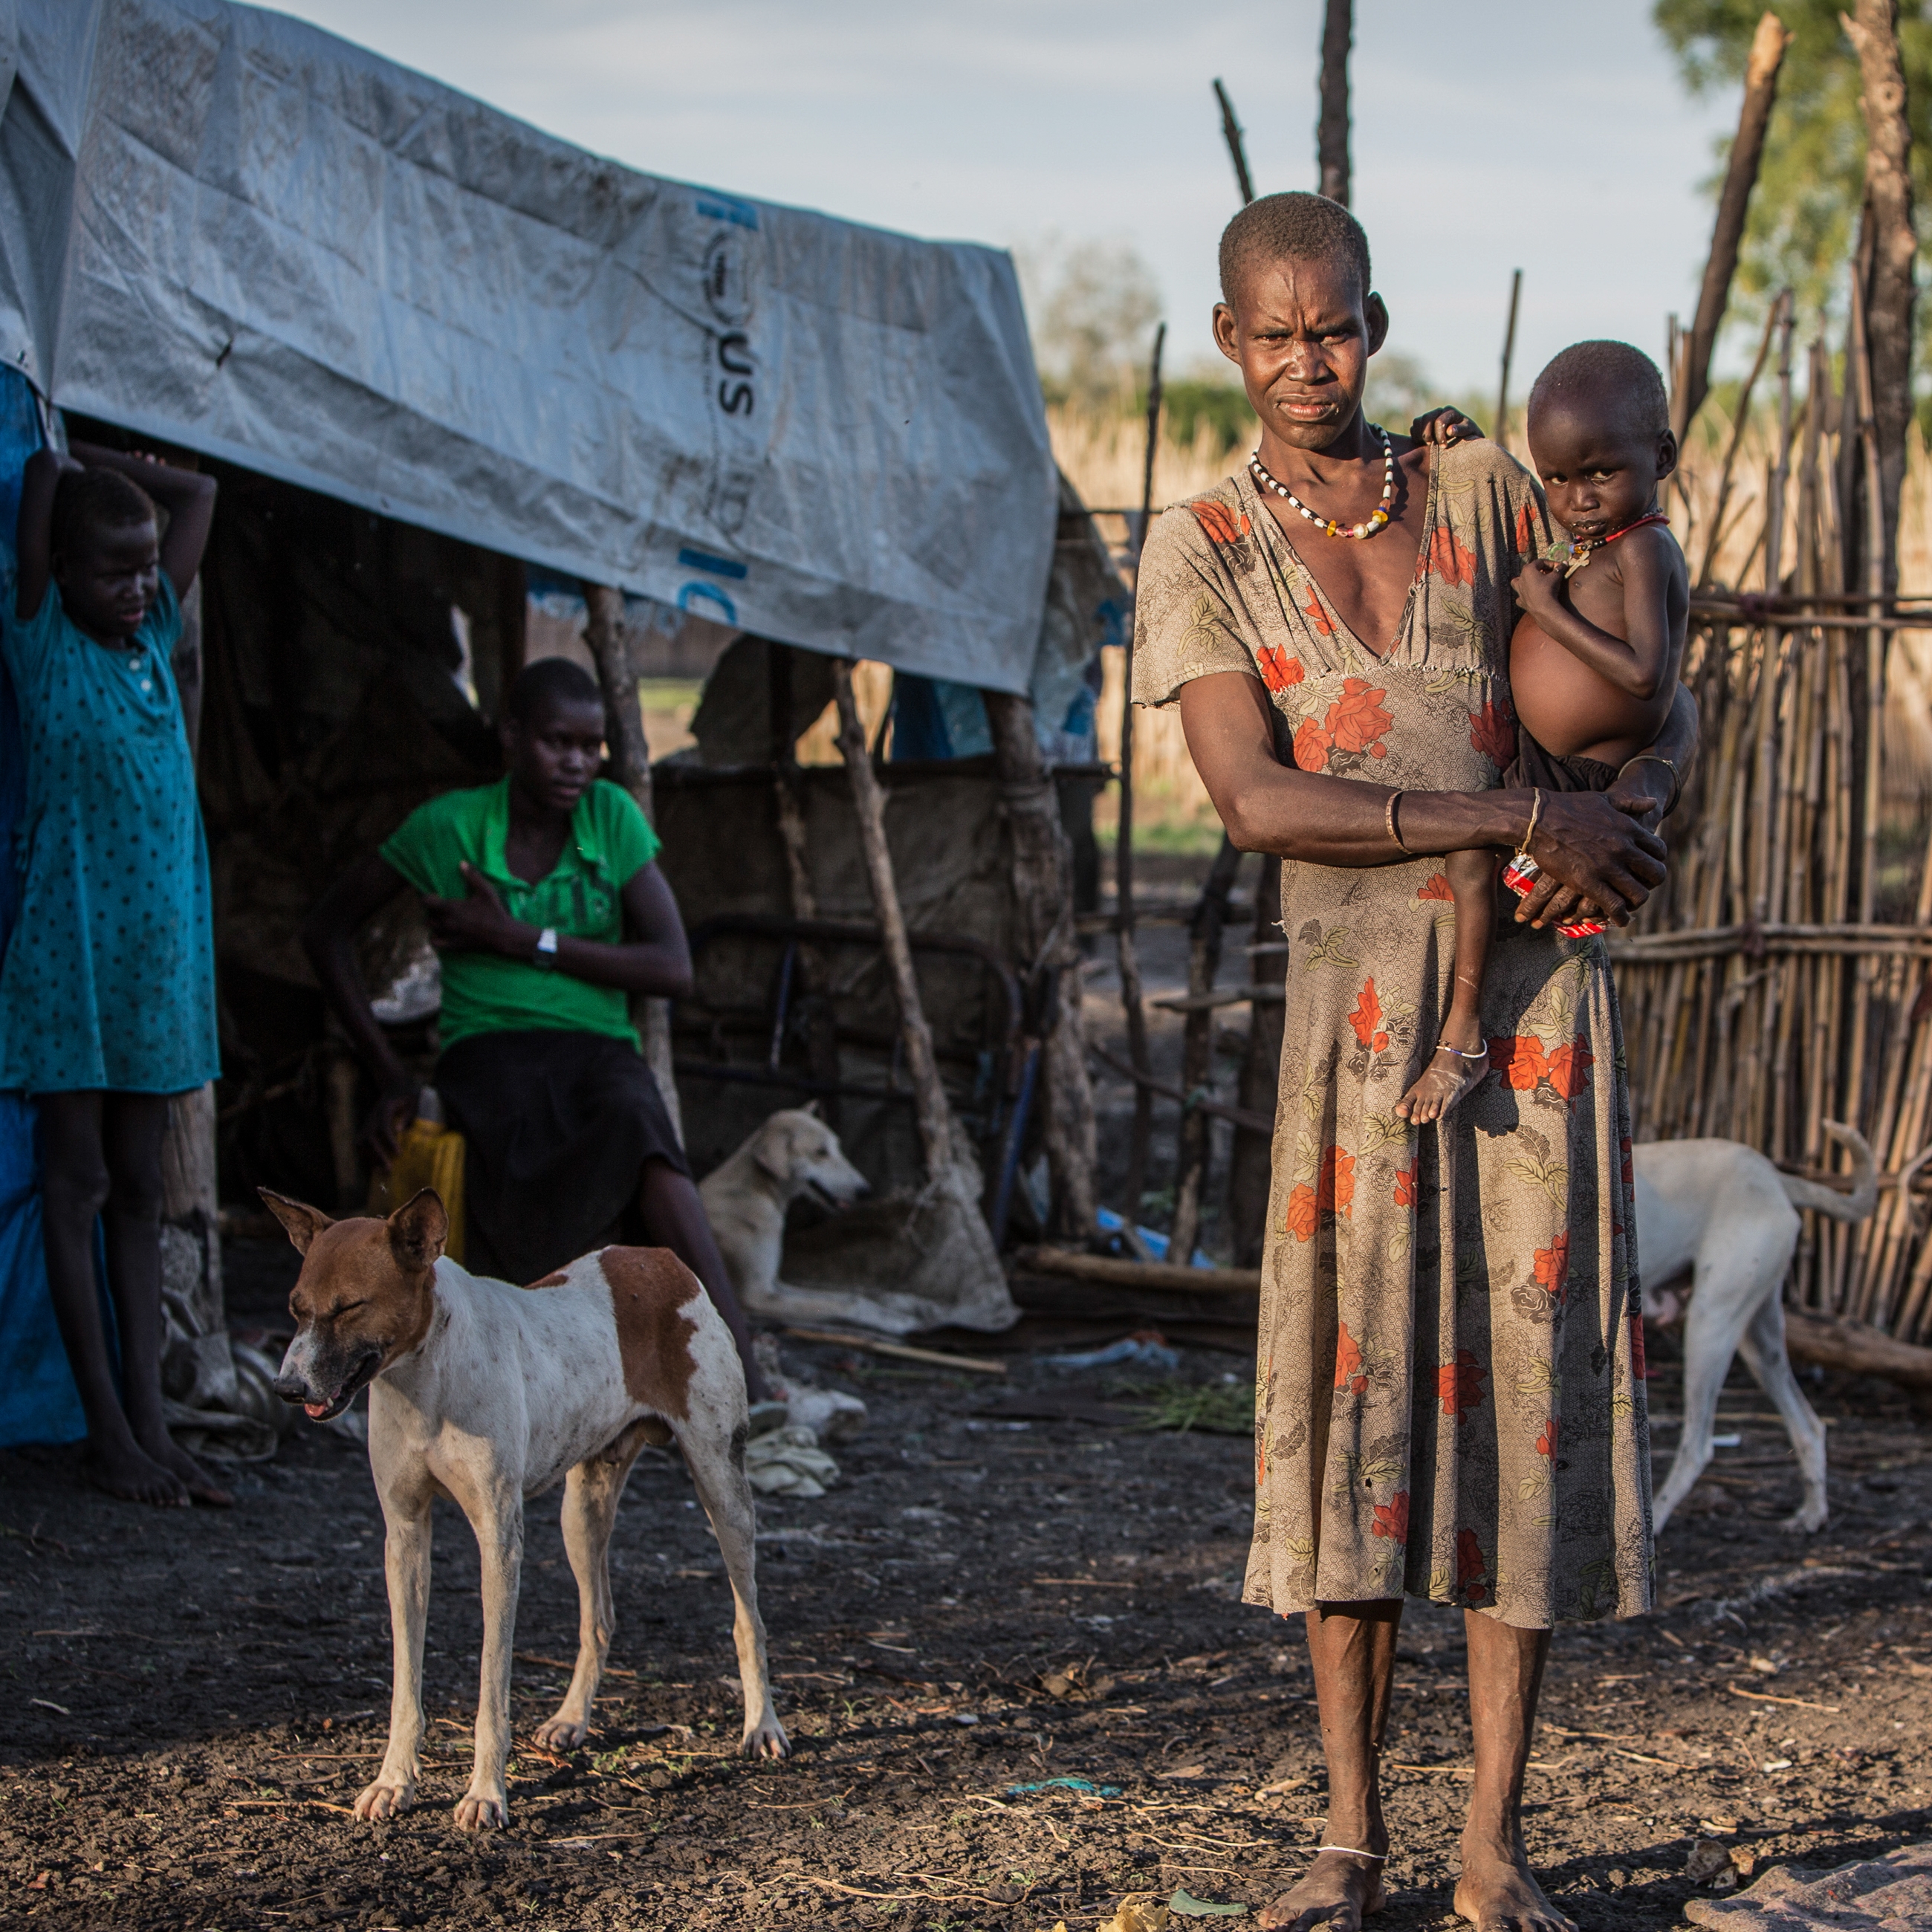 Tahani*, a widow, holding her 3-year-old son Chuol*. Her two daughters – ages 9 and 12 – stand behind her at their temporary home in Akobo, South Sudan. Photo credit: Jonathan Hyams/Save the Children 2015.